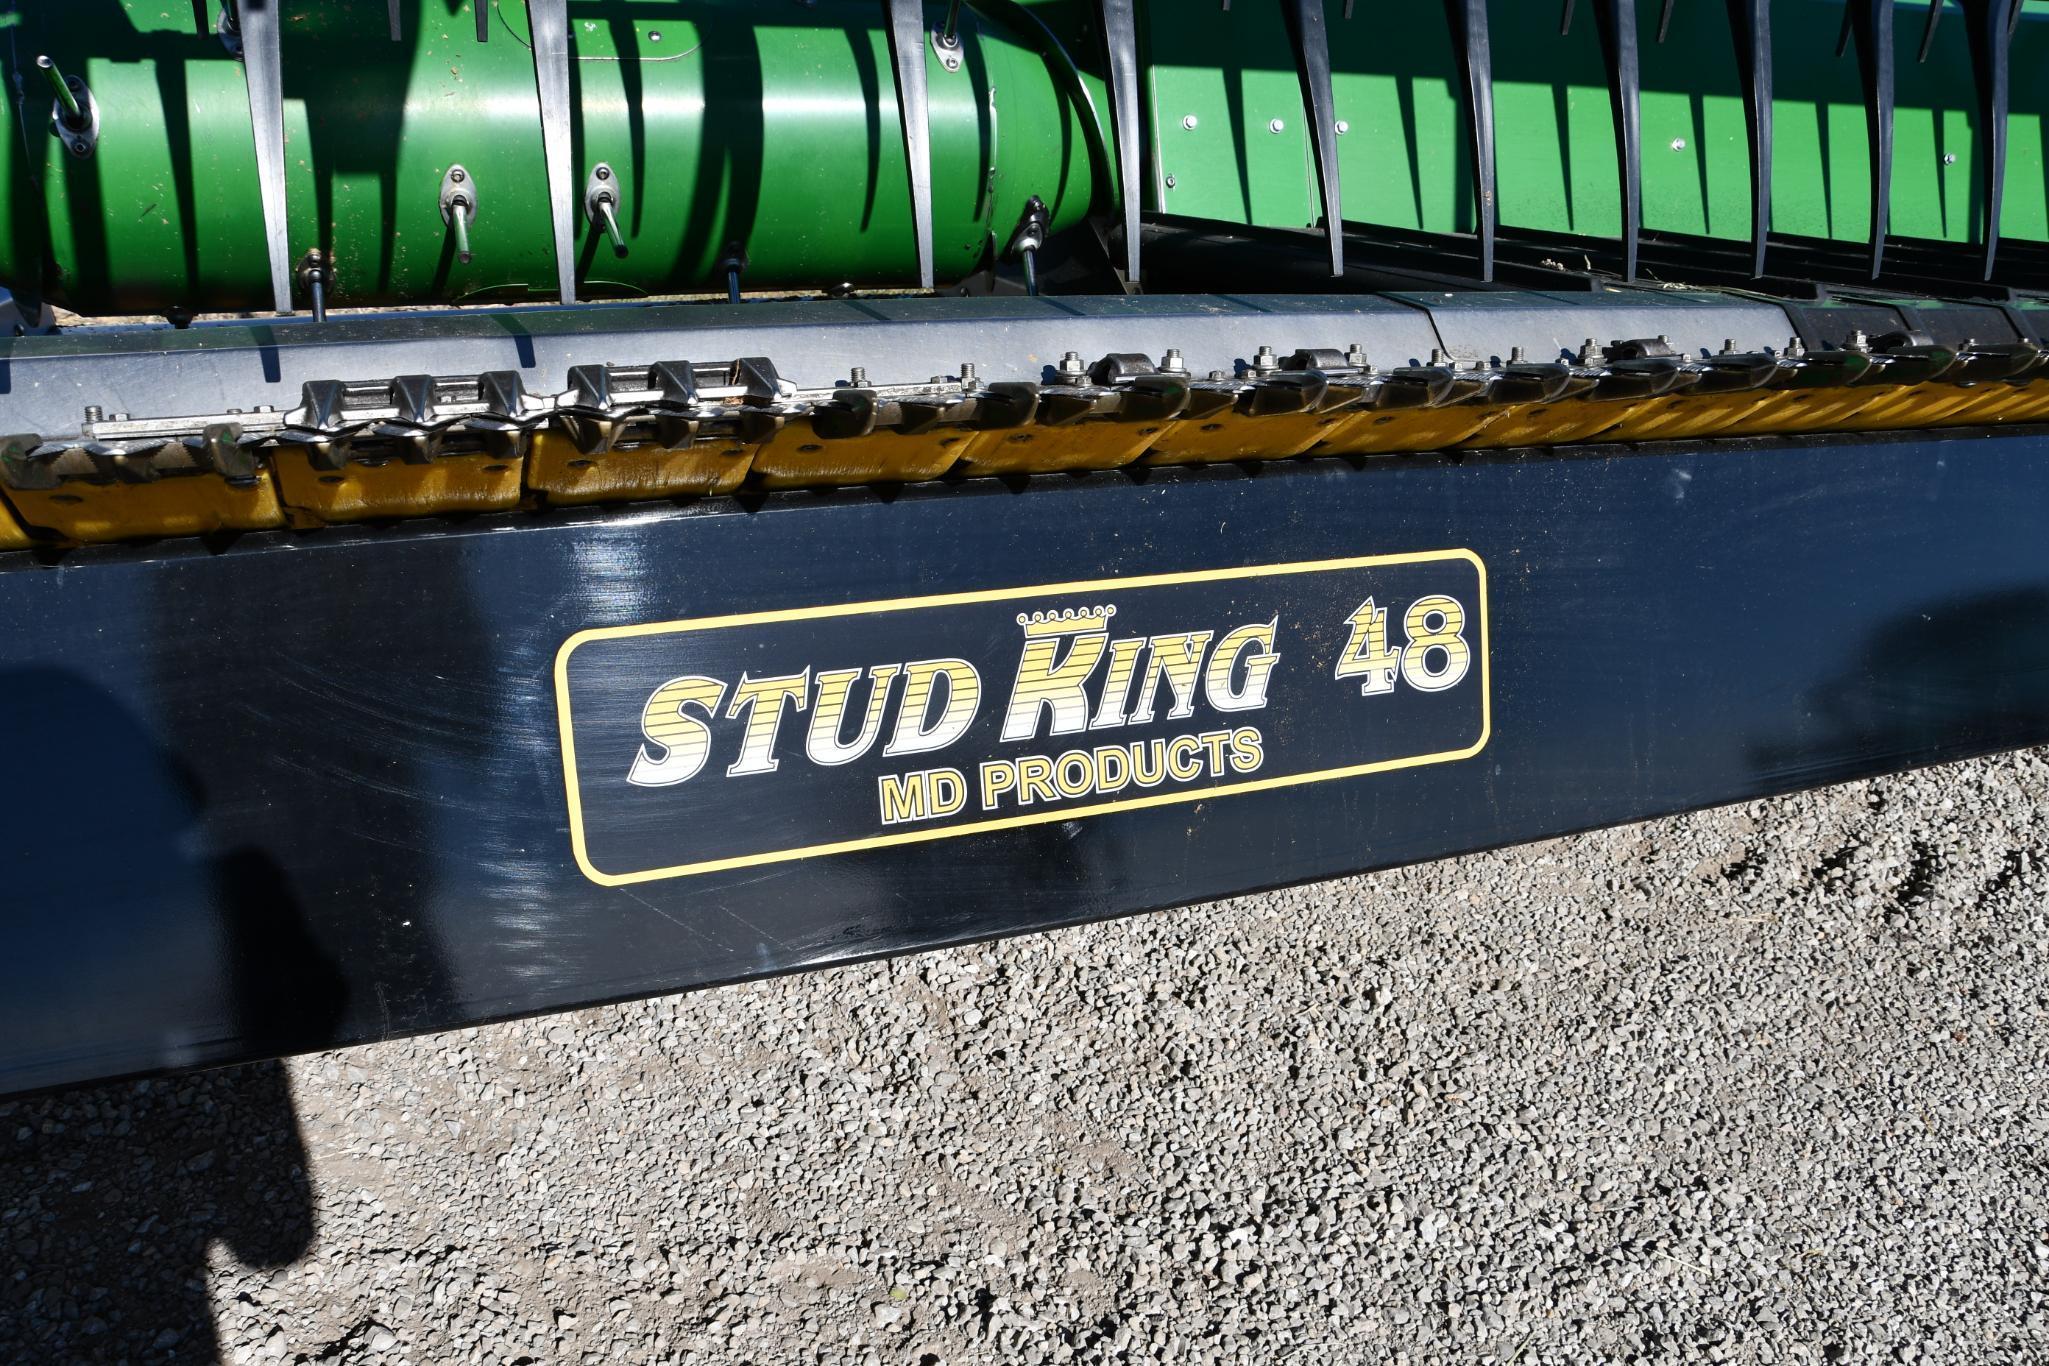 MD Products Stud King 48' head cart